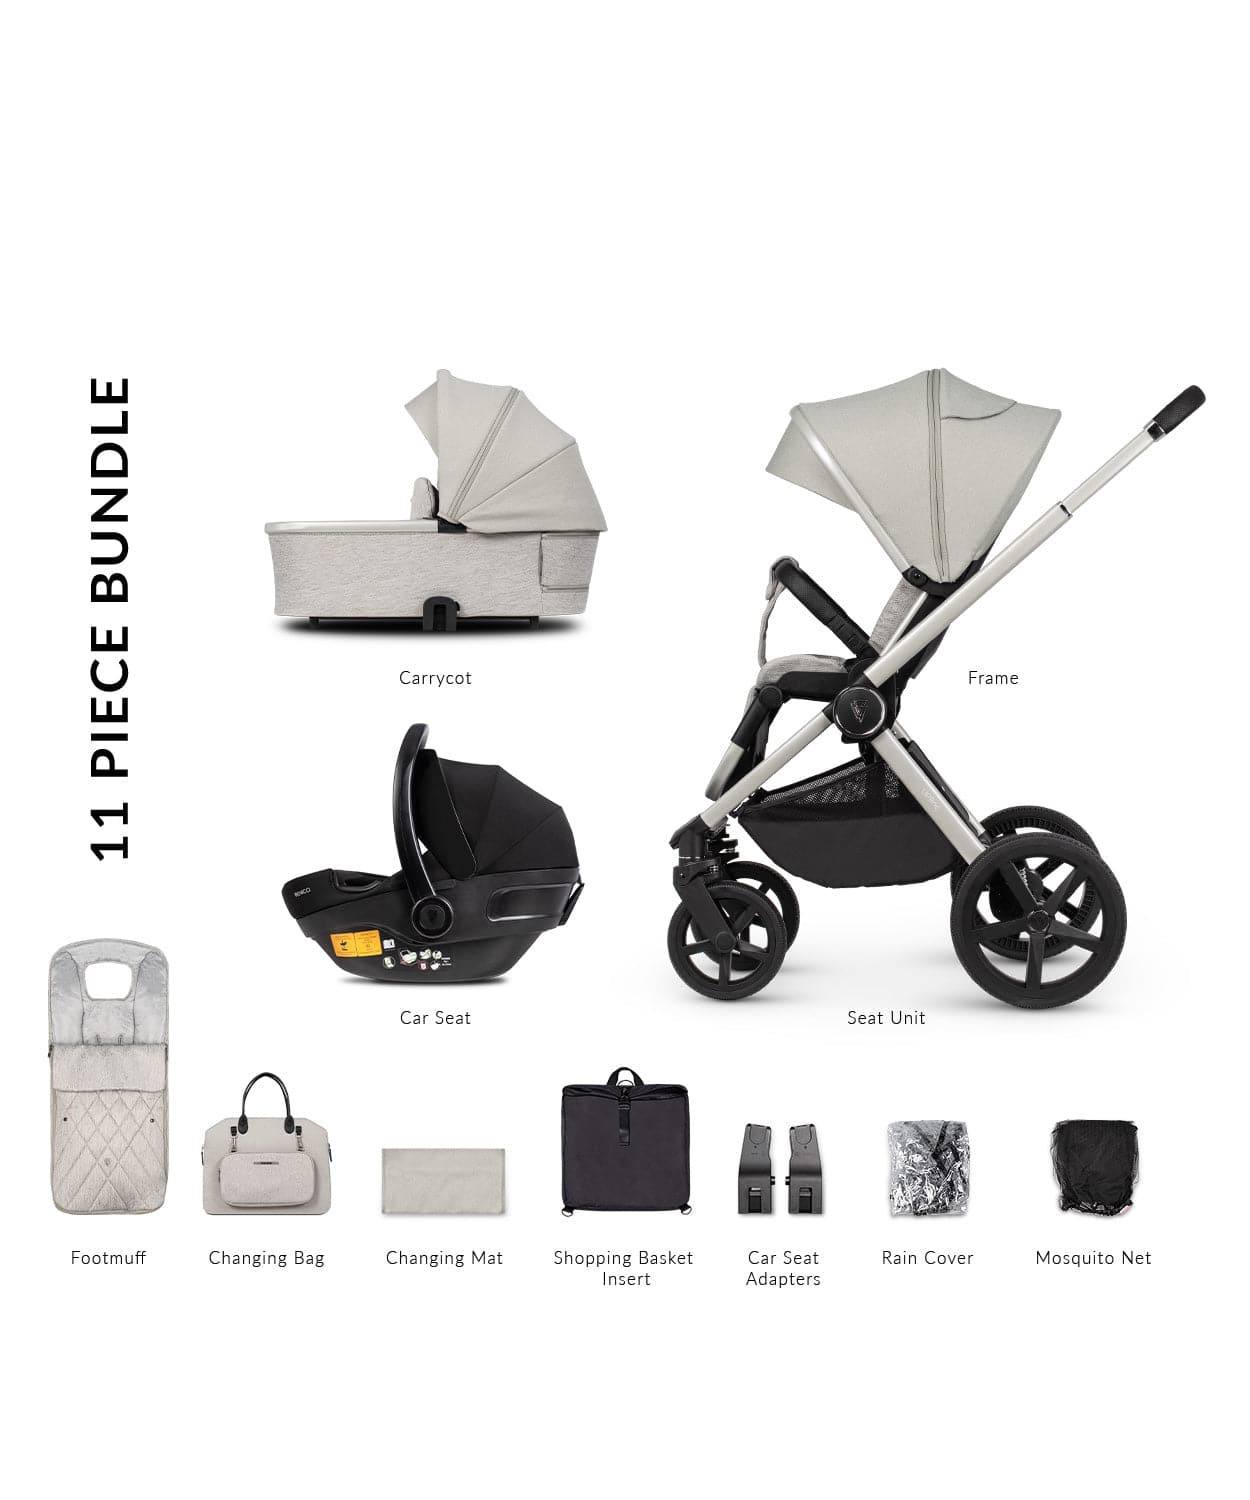 Venicci Tinum Upline 3 In 1 Travel System - Moonstone - For Your Little One